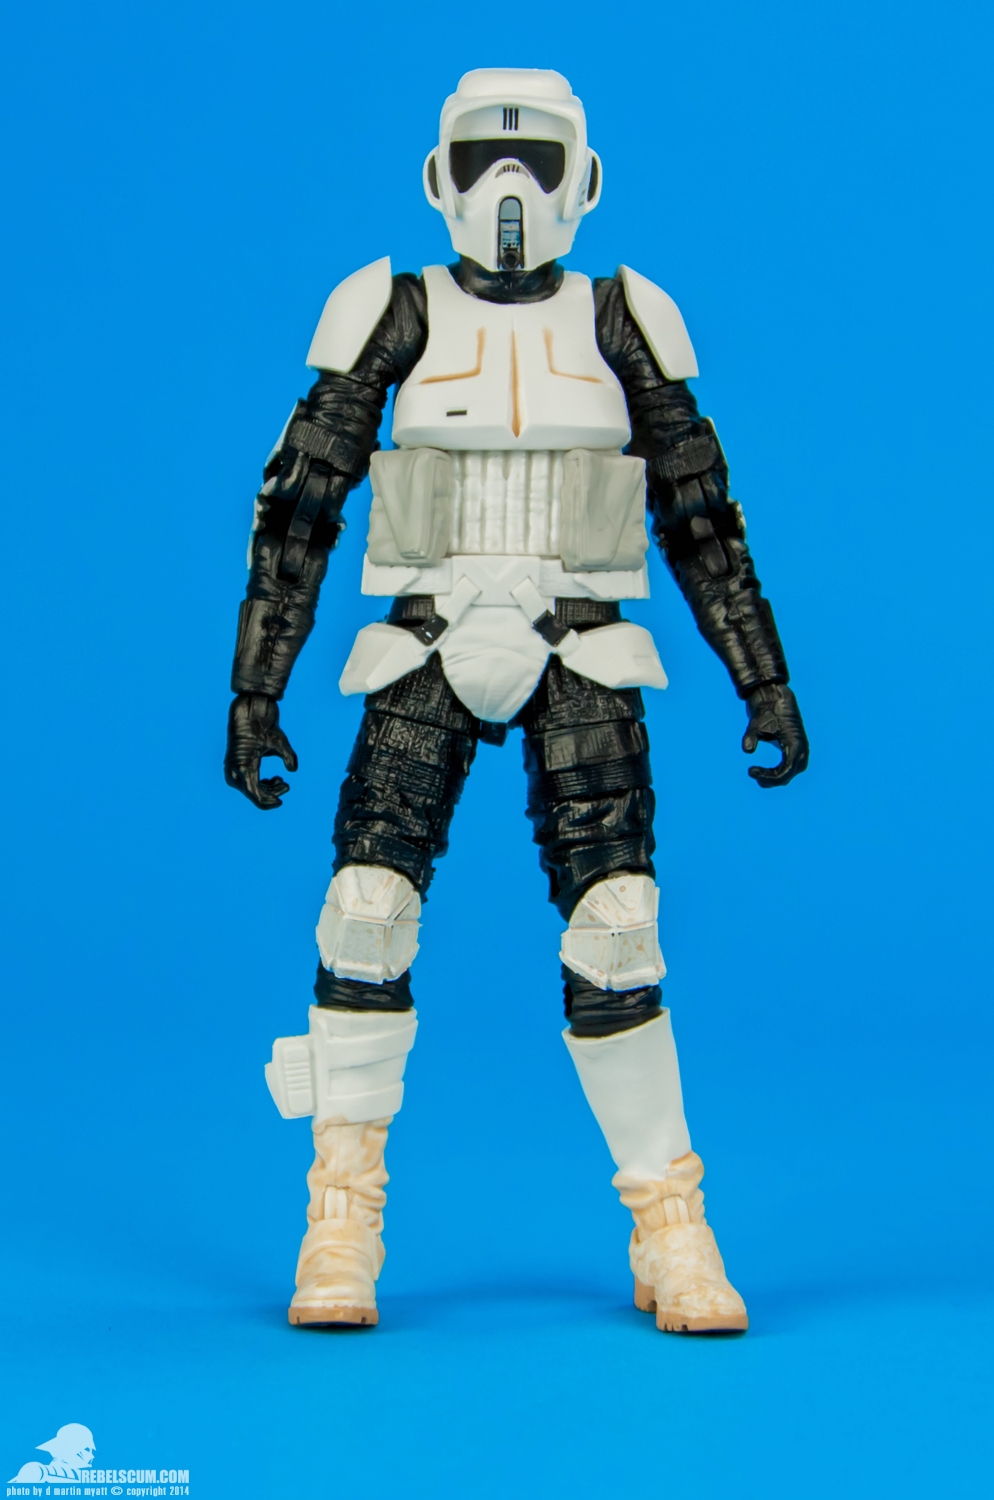 FIRST ORDER FLAMETROOPER "THE LAST JEDI" COLLECTION 2018 VON HASBRO 